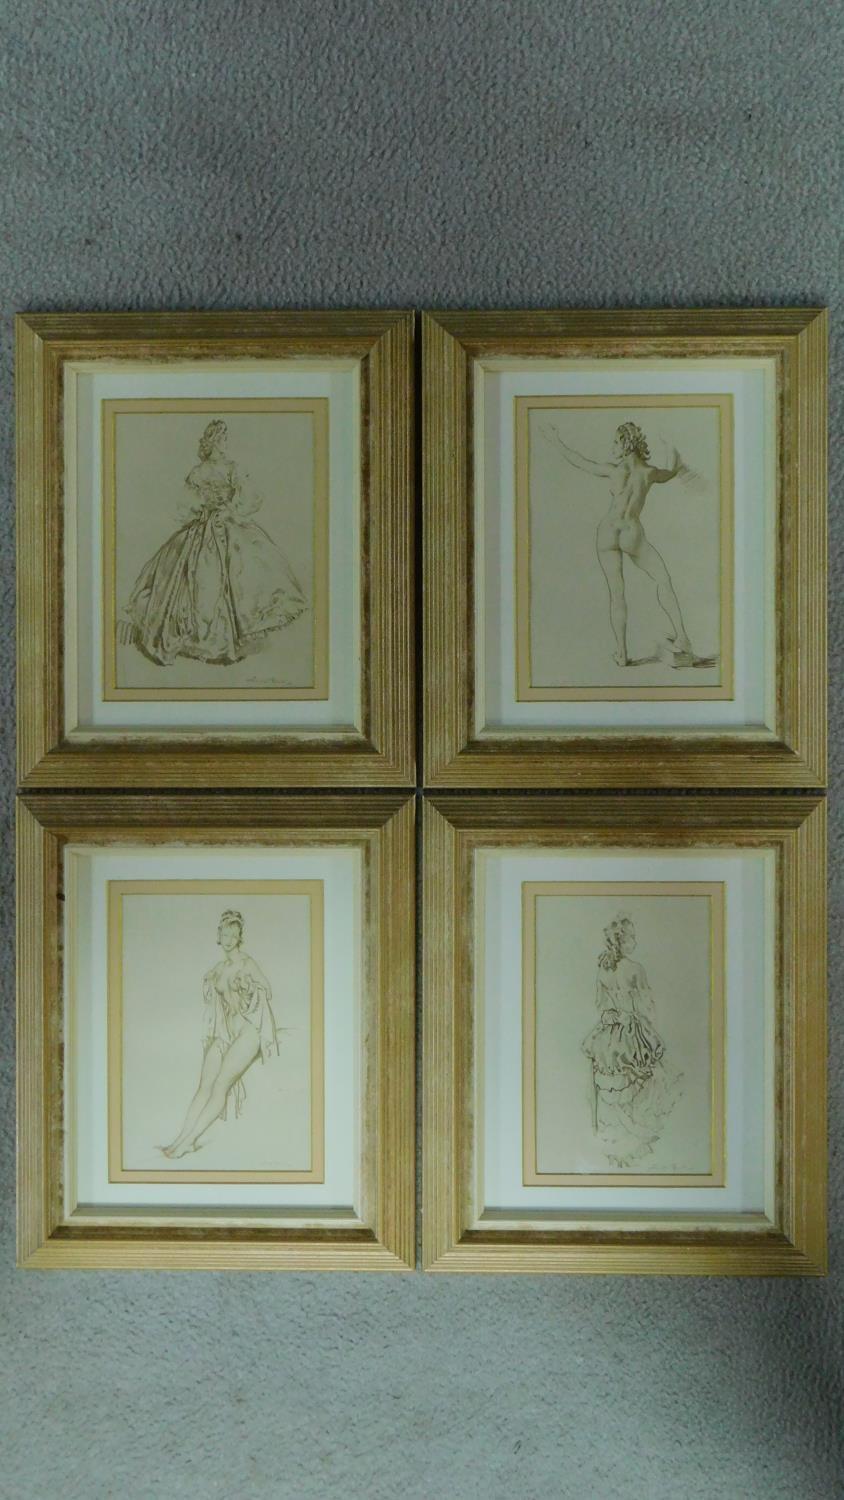 Four framed and glazed lithographic prints of various human form by Sir William Russel Flint.